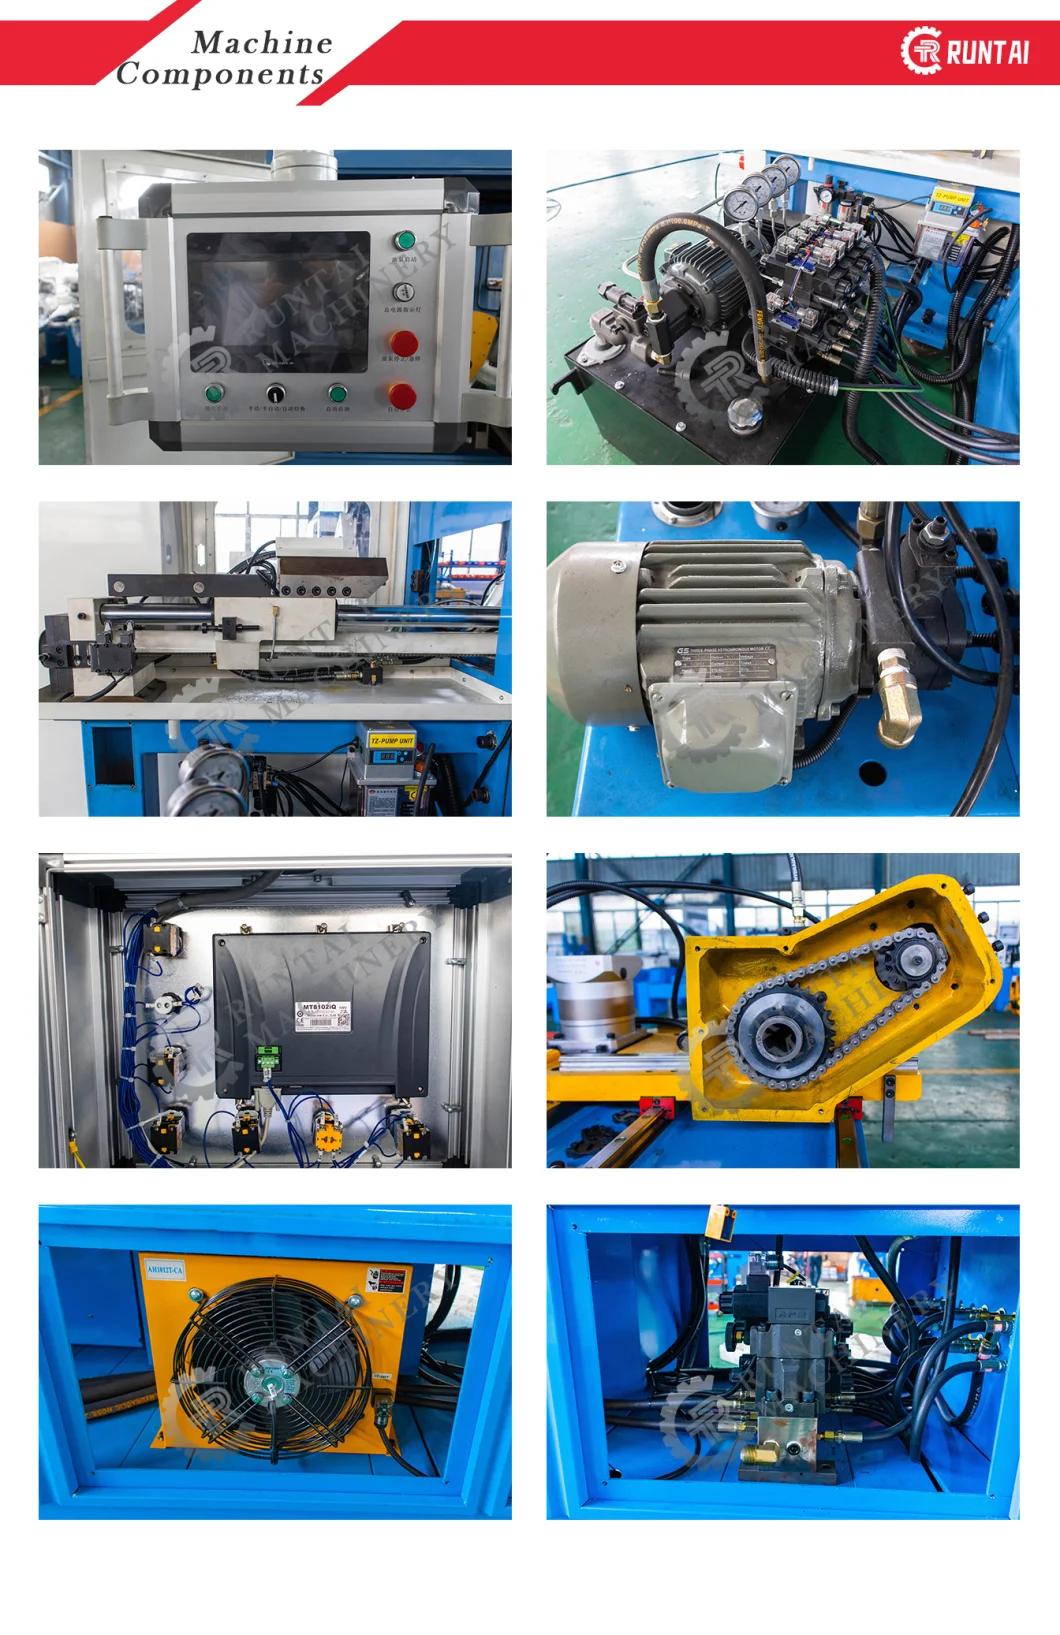 Rt-38 CNC Buy Automatic Hydraulic Servo 3 Axis 3D Tube Bender Exhaust Metal Stainless Ss Rolling Pipe Bending Machine Price